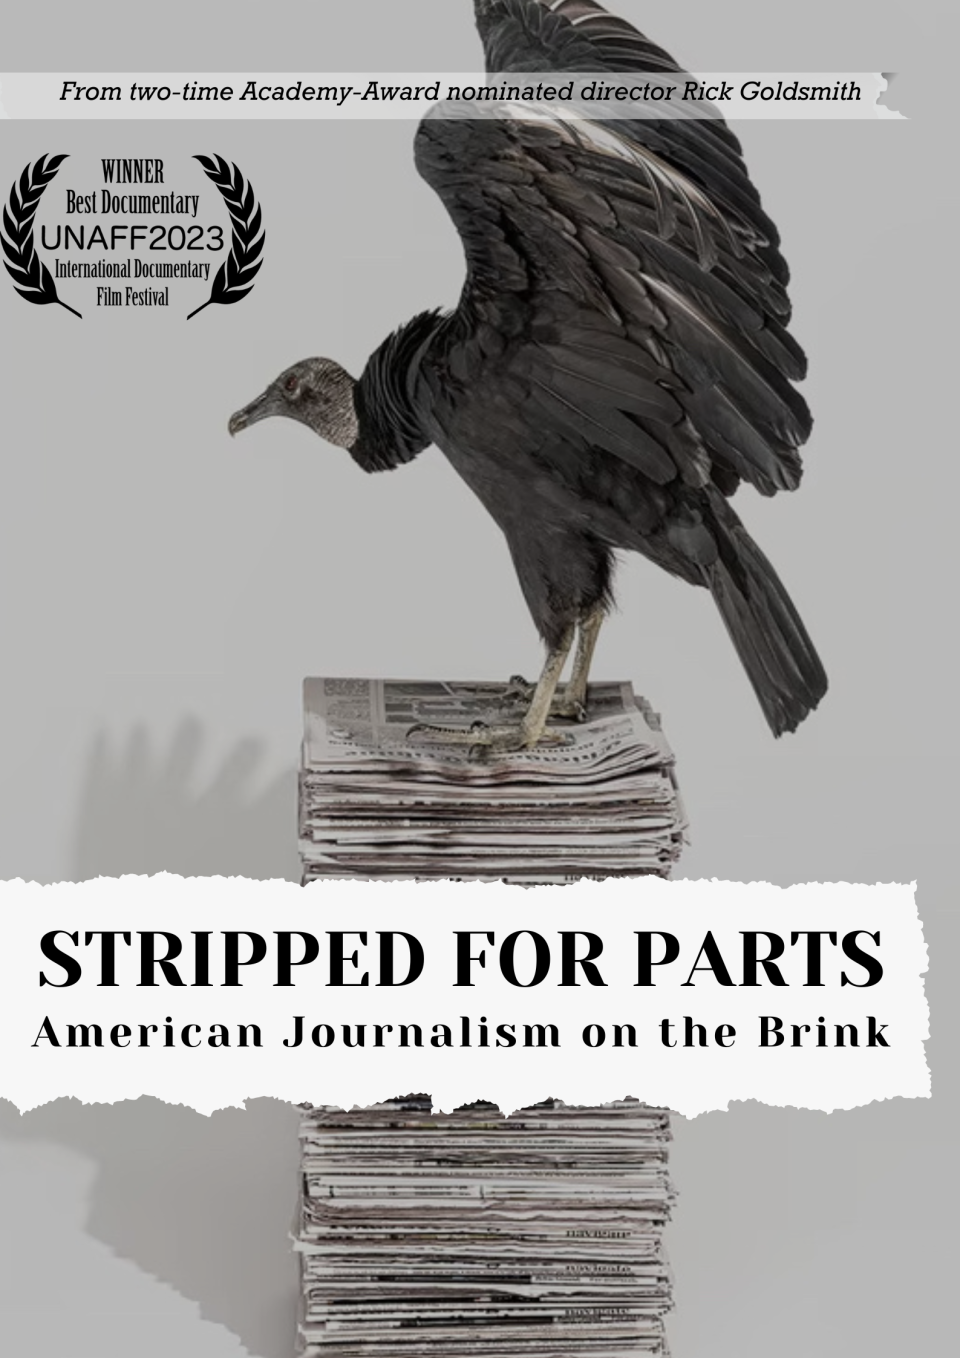 A black and white vulture spreads its wings, sitting atop a stack of newspapers. A UNAFF laurel shows winner in 2023. The title "Stripped for Parts: American Journalism on the Brink" is in black letters over a torn white paper.